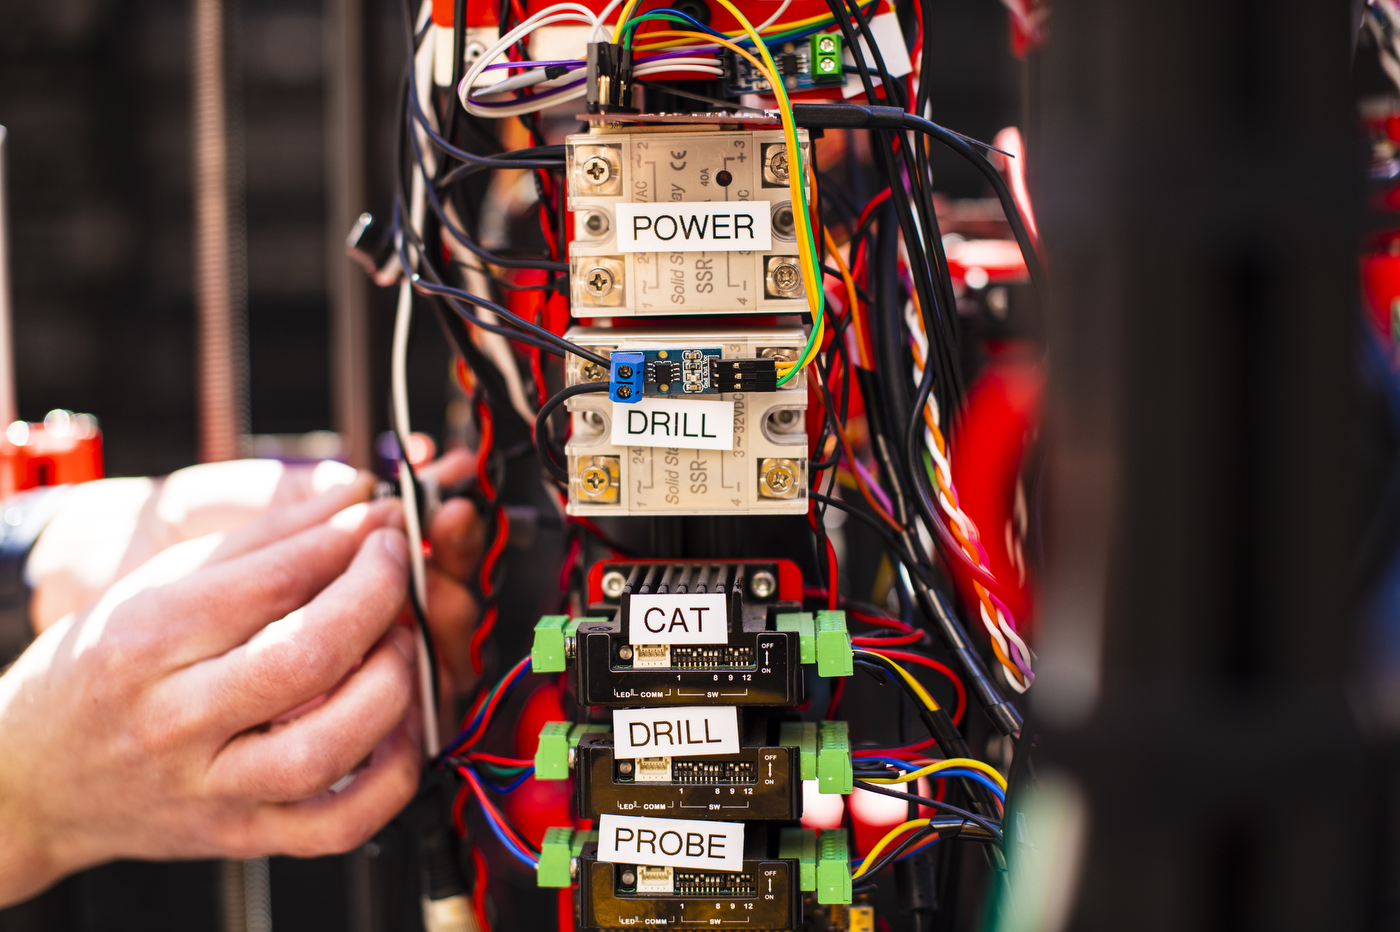 Stacks of chips, all plugged in, and labeled 'Power', 'Drill', 'Cat', 'Drill', and 'Probe'